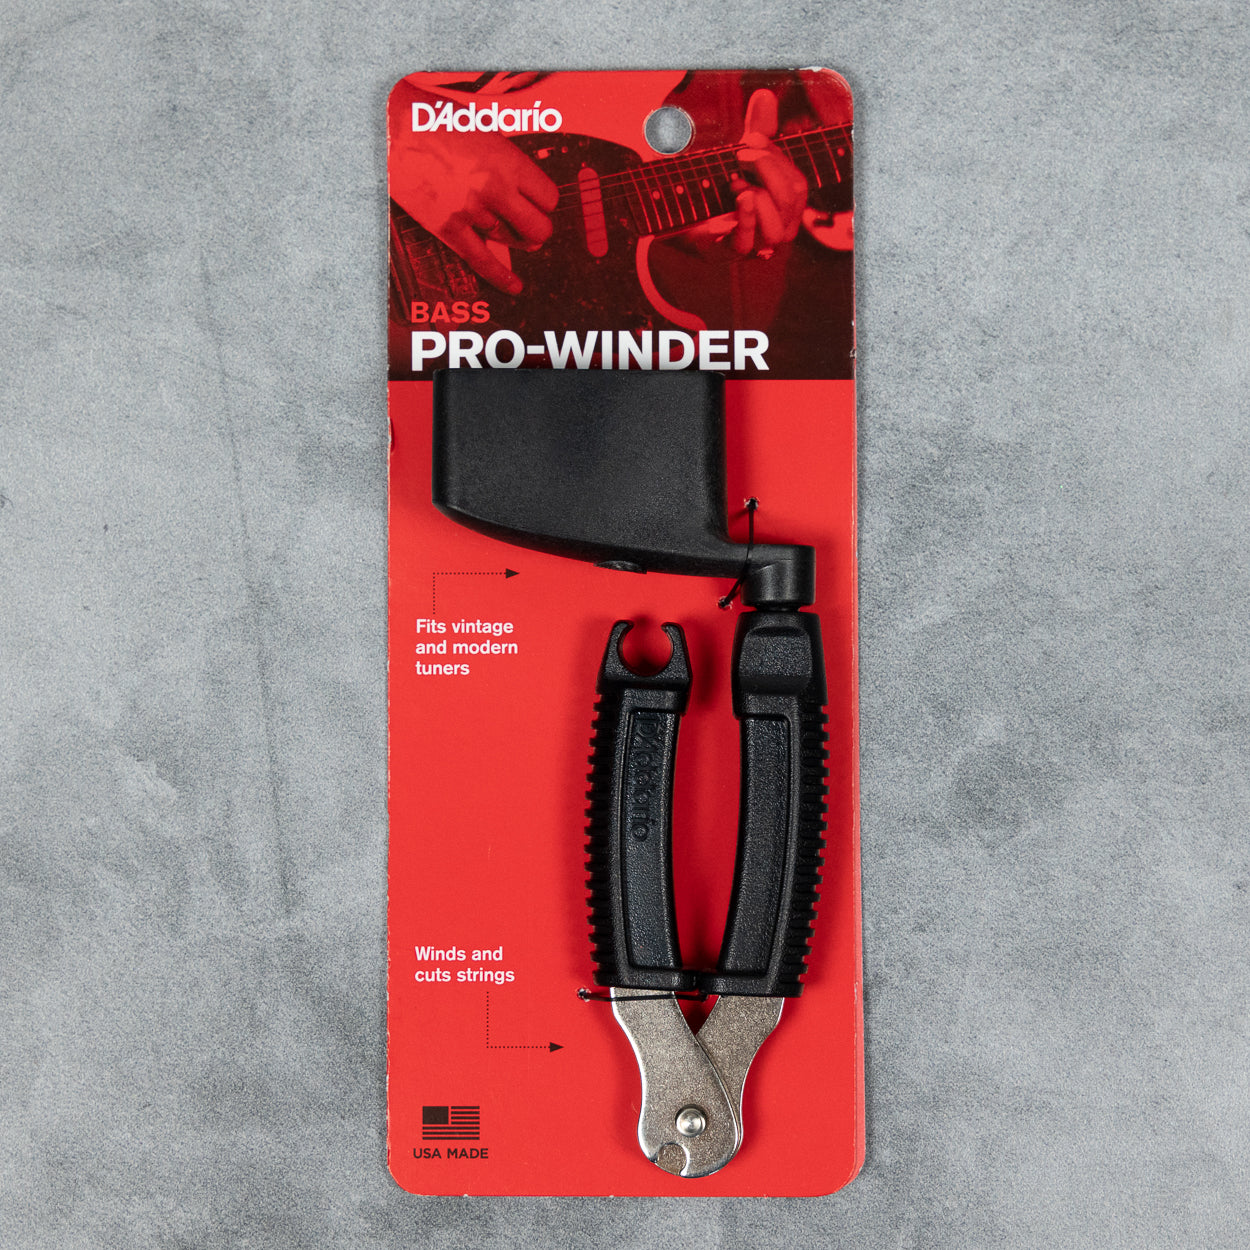 D'Addario Pro-Winder for Bass